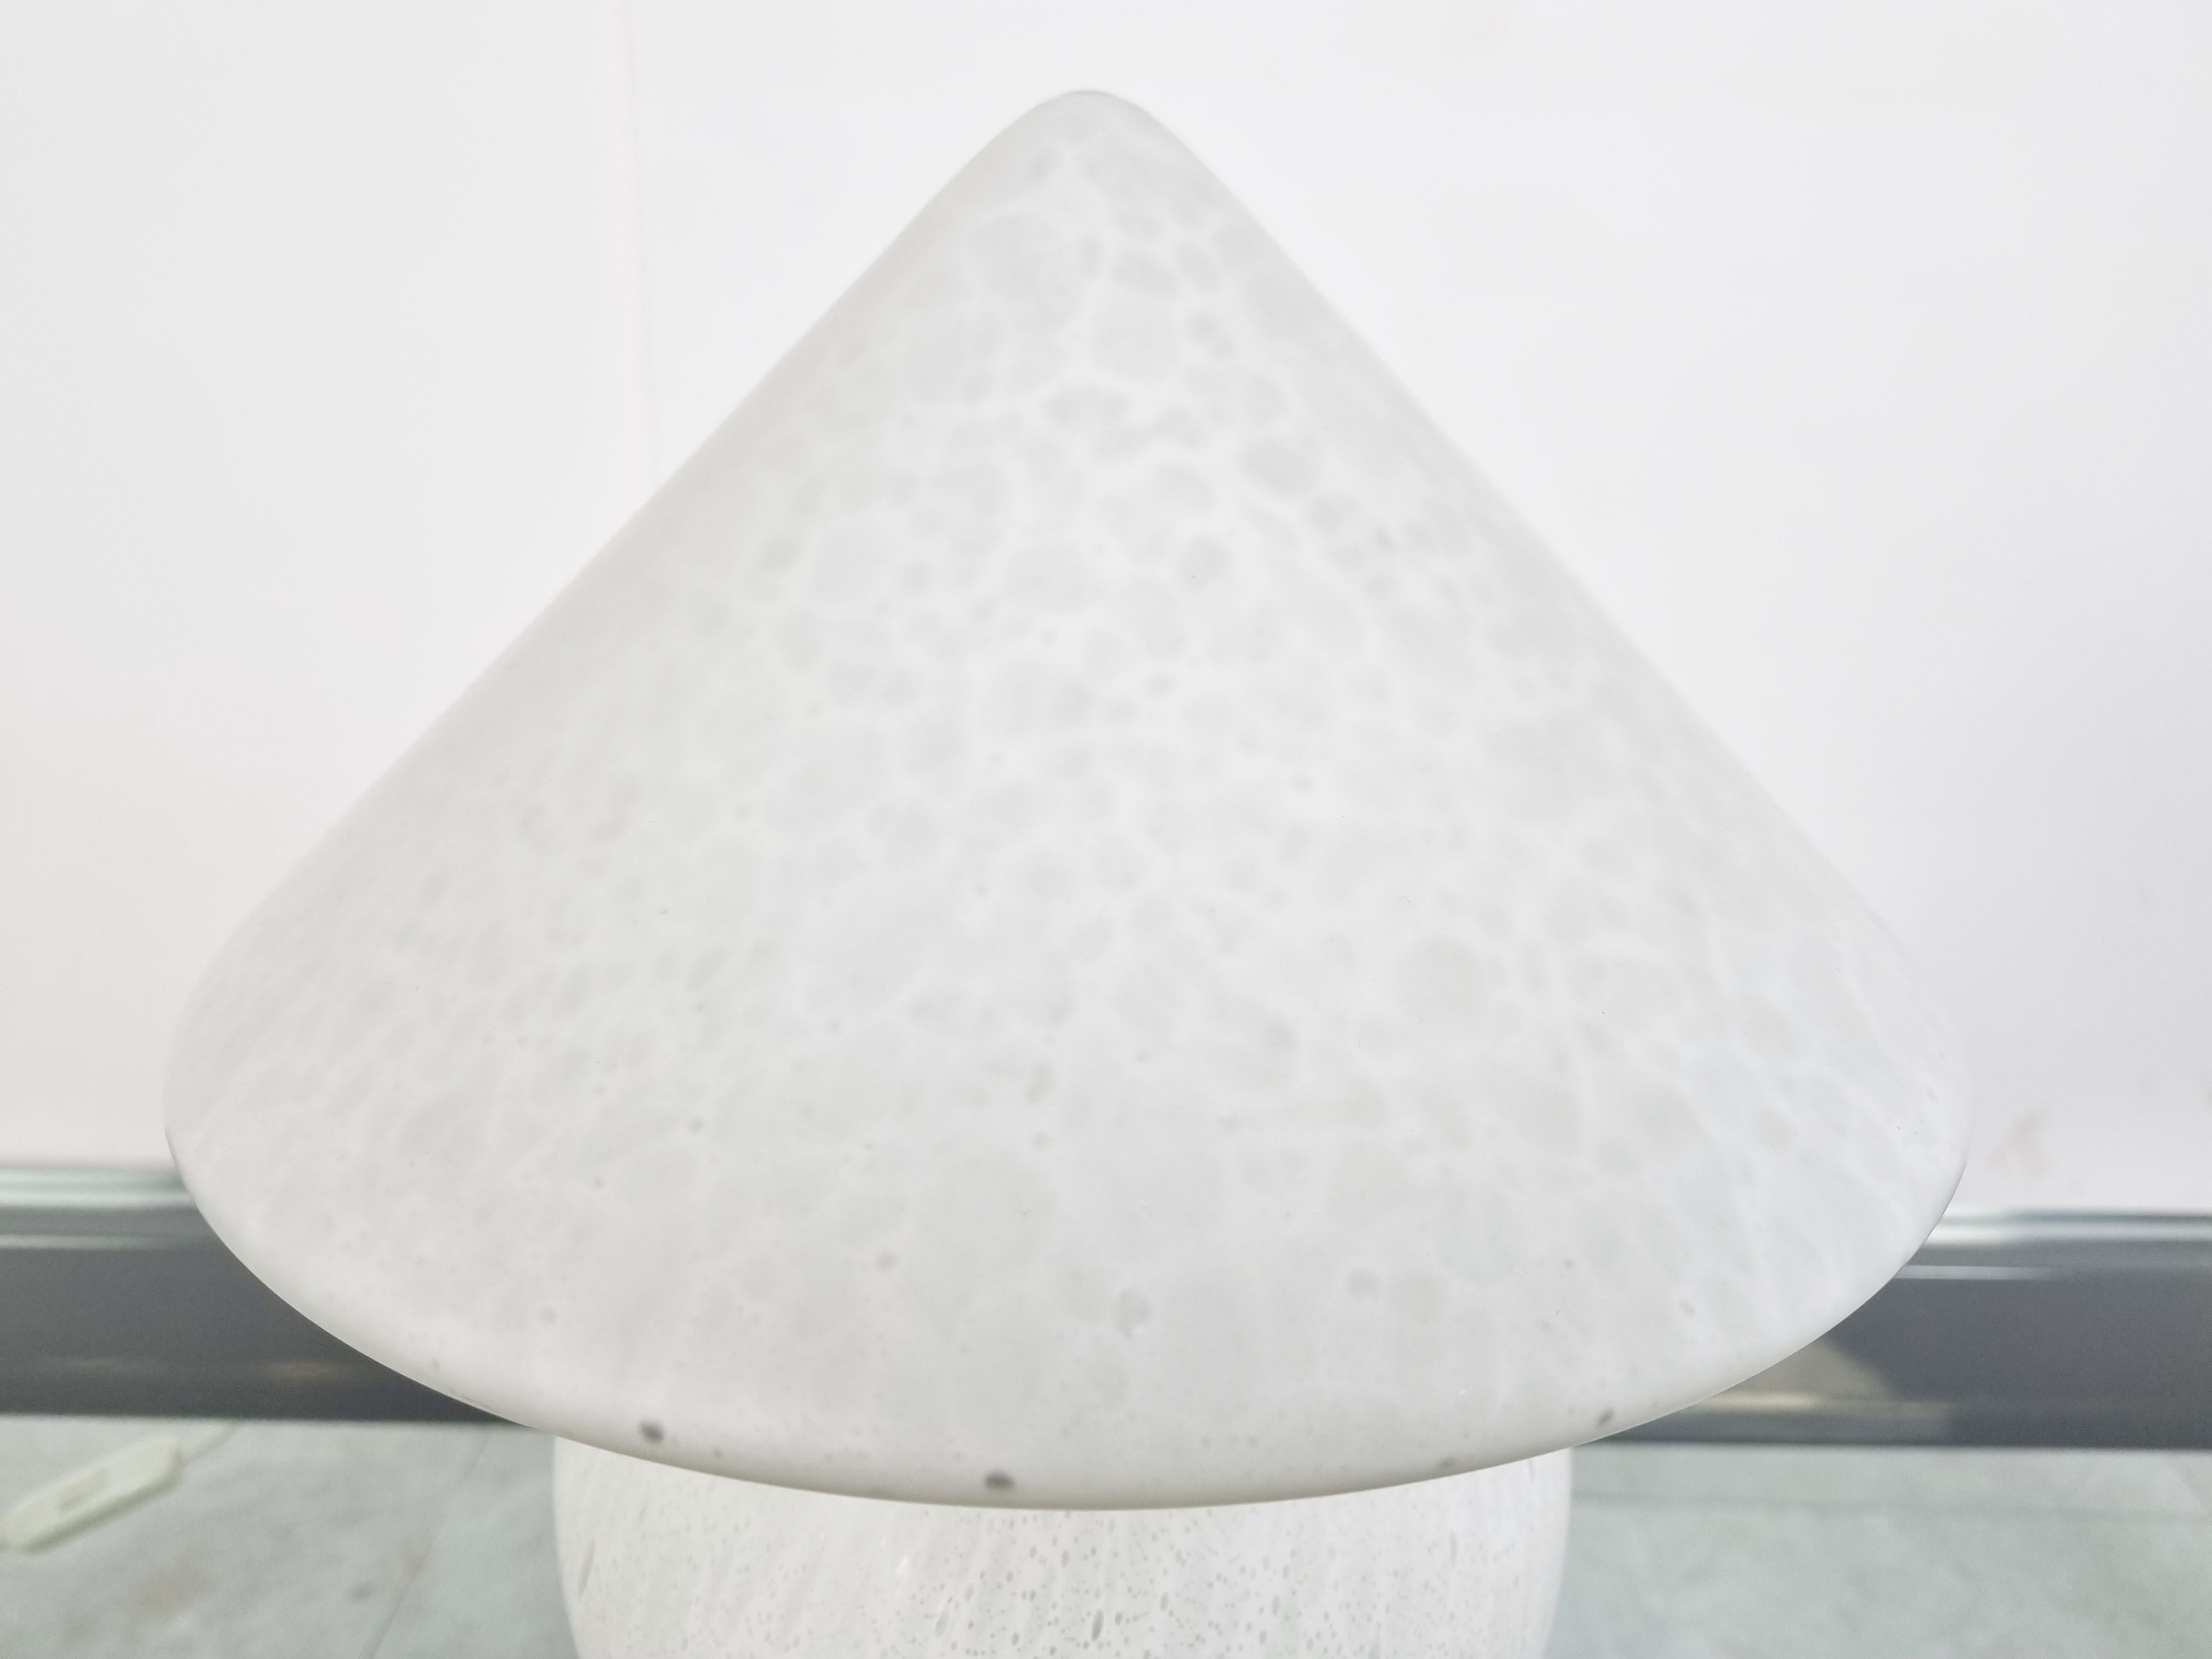 Vintage blown murano glass 'mushroom' table lamp by Peil & Putzler

The lamp emits a beautiful soft light. 

1970s - Germany

Good condition, tested and ready for use.

Dimensions:

Height: 25cm / 9.84